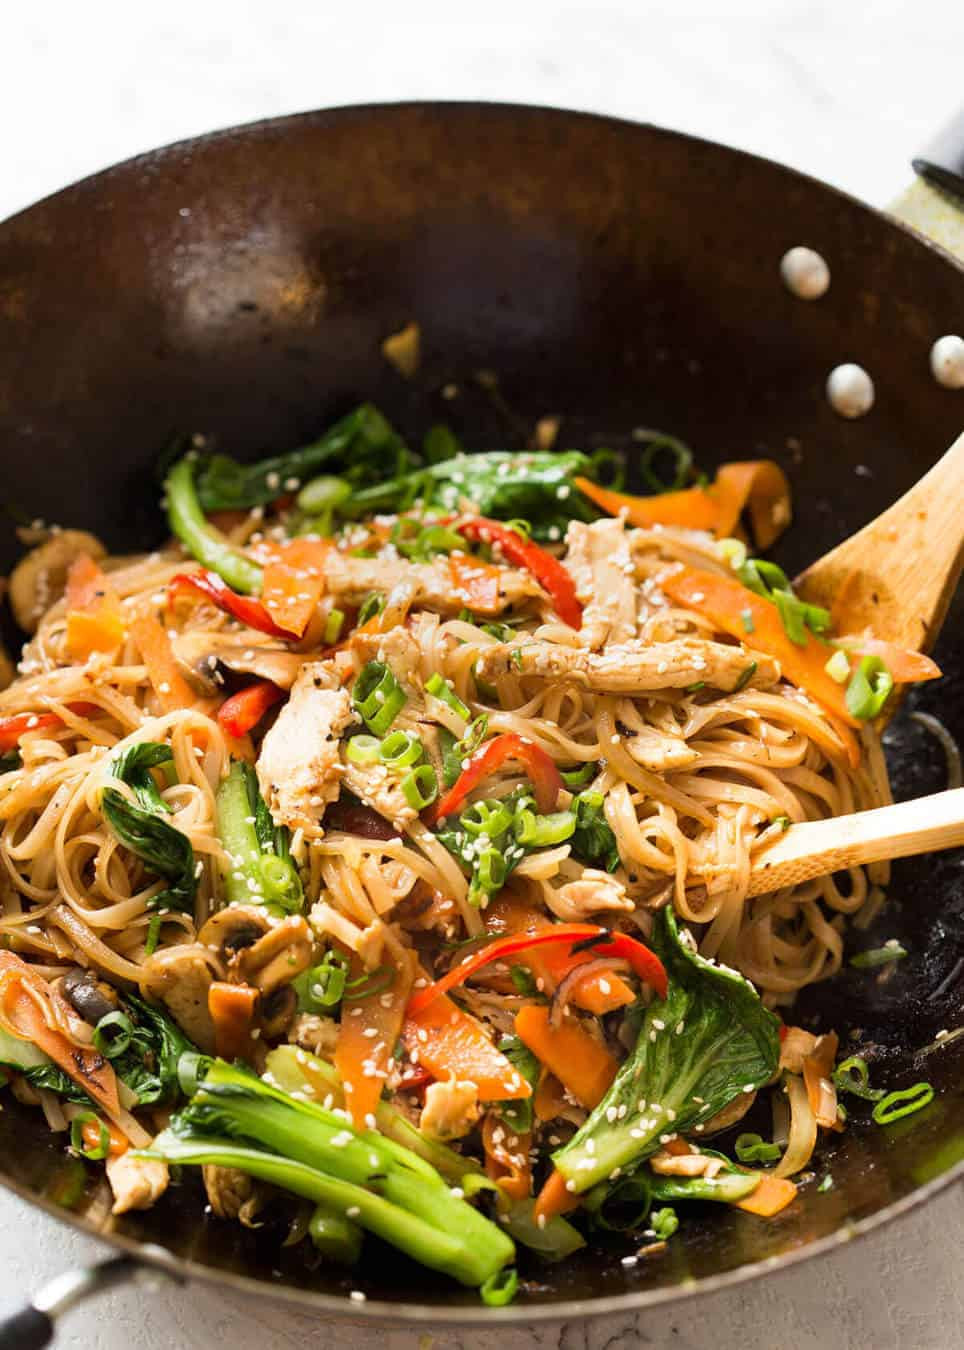 Stir Fried Rice Noodles Recipe
 Chicken Stir Fry with Rice Noodles